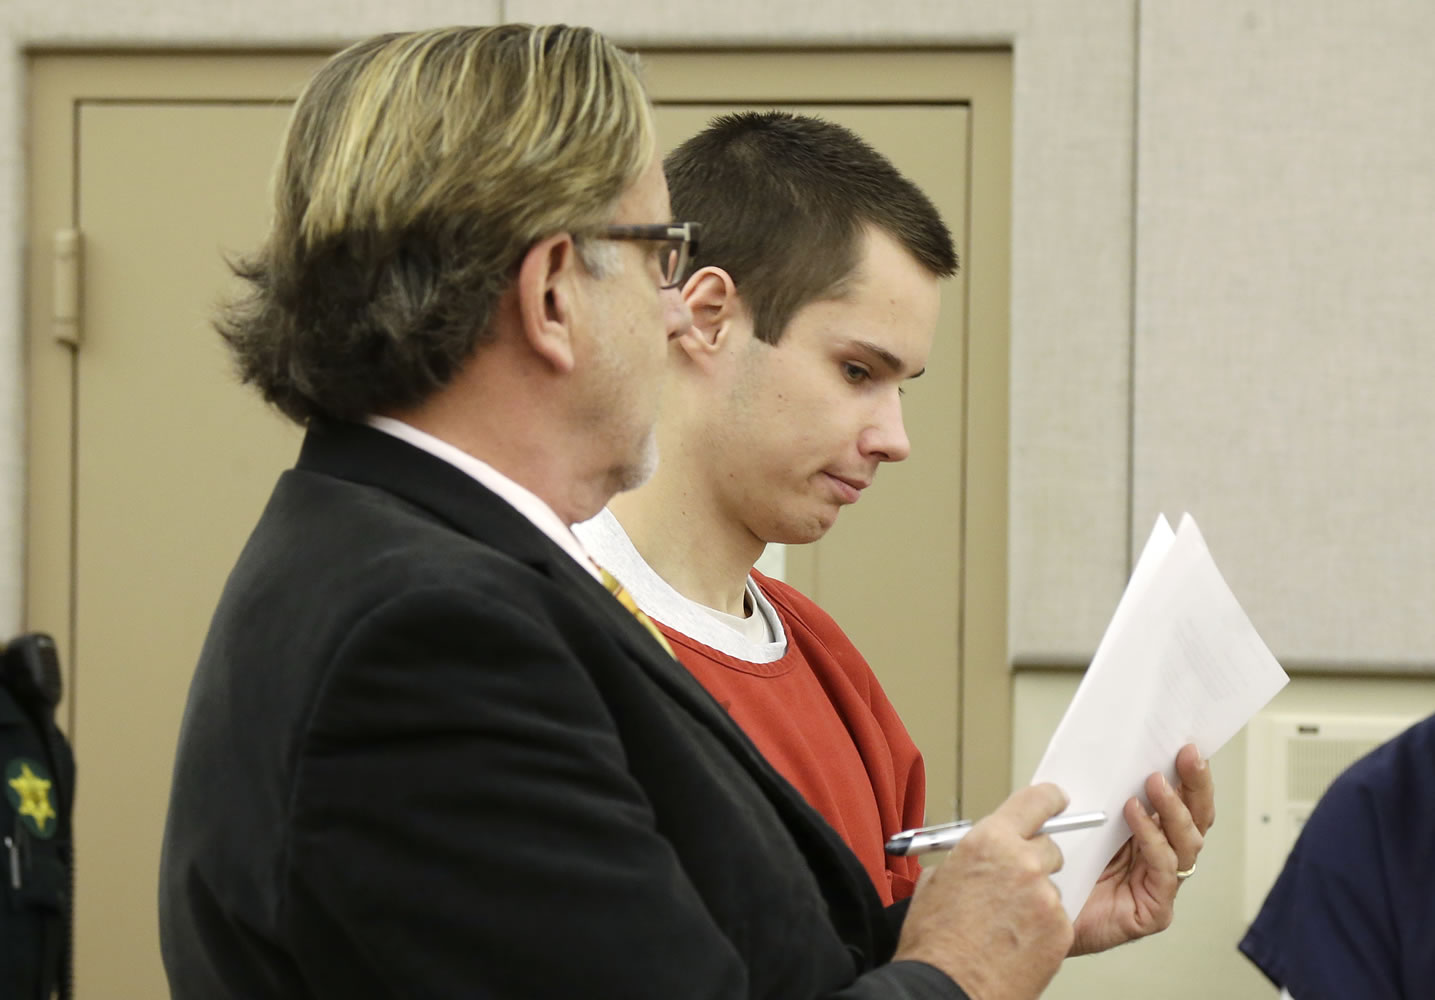 Colton Harris-Moore, right, also known as the &quot;Barefoot Bandit,&quot; appears in a court hearing with his attorney, John Henry Browne, left, Thursday in Mount Vernon.